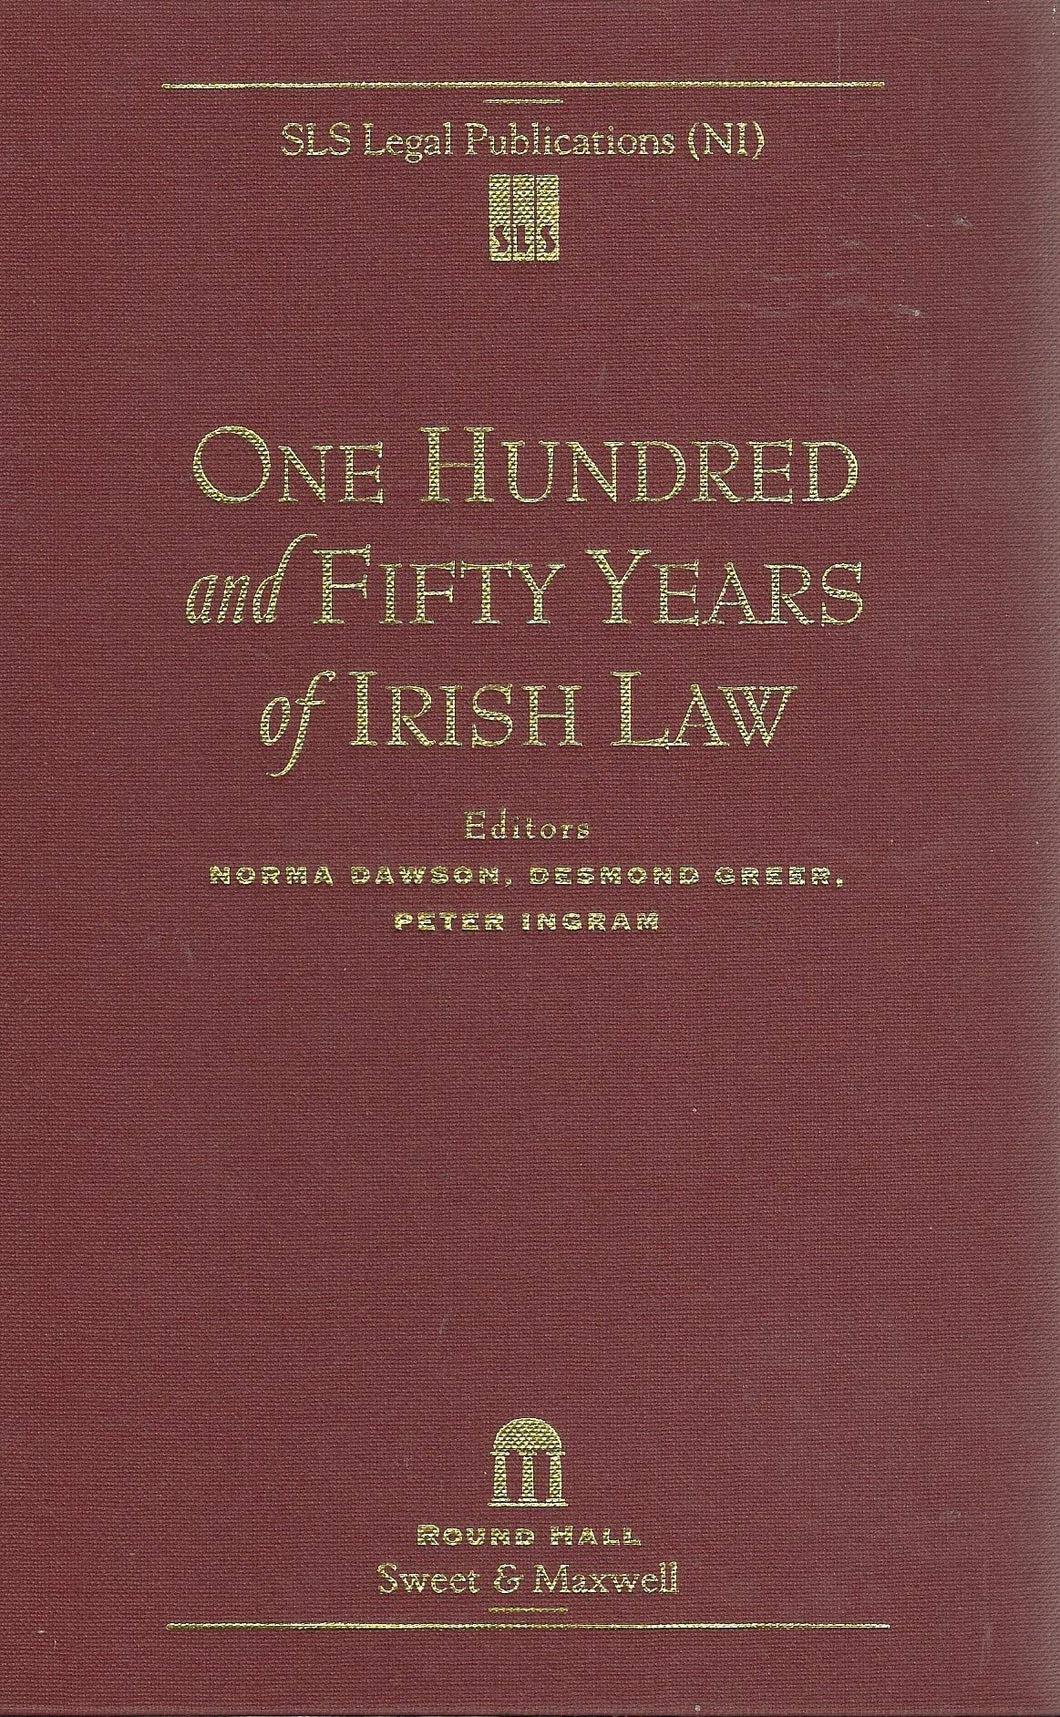 One Hundred and Fifty Years of Irish Law